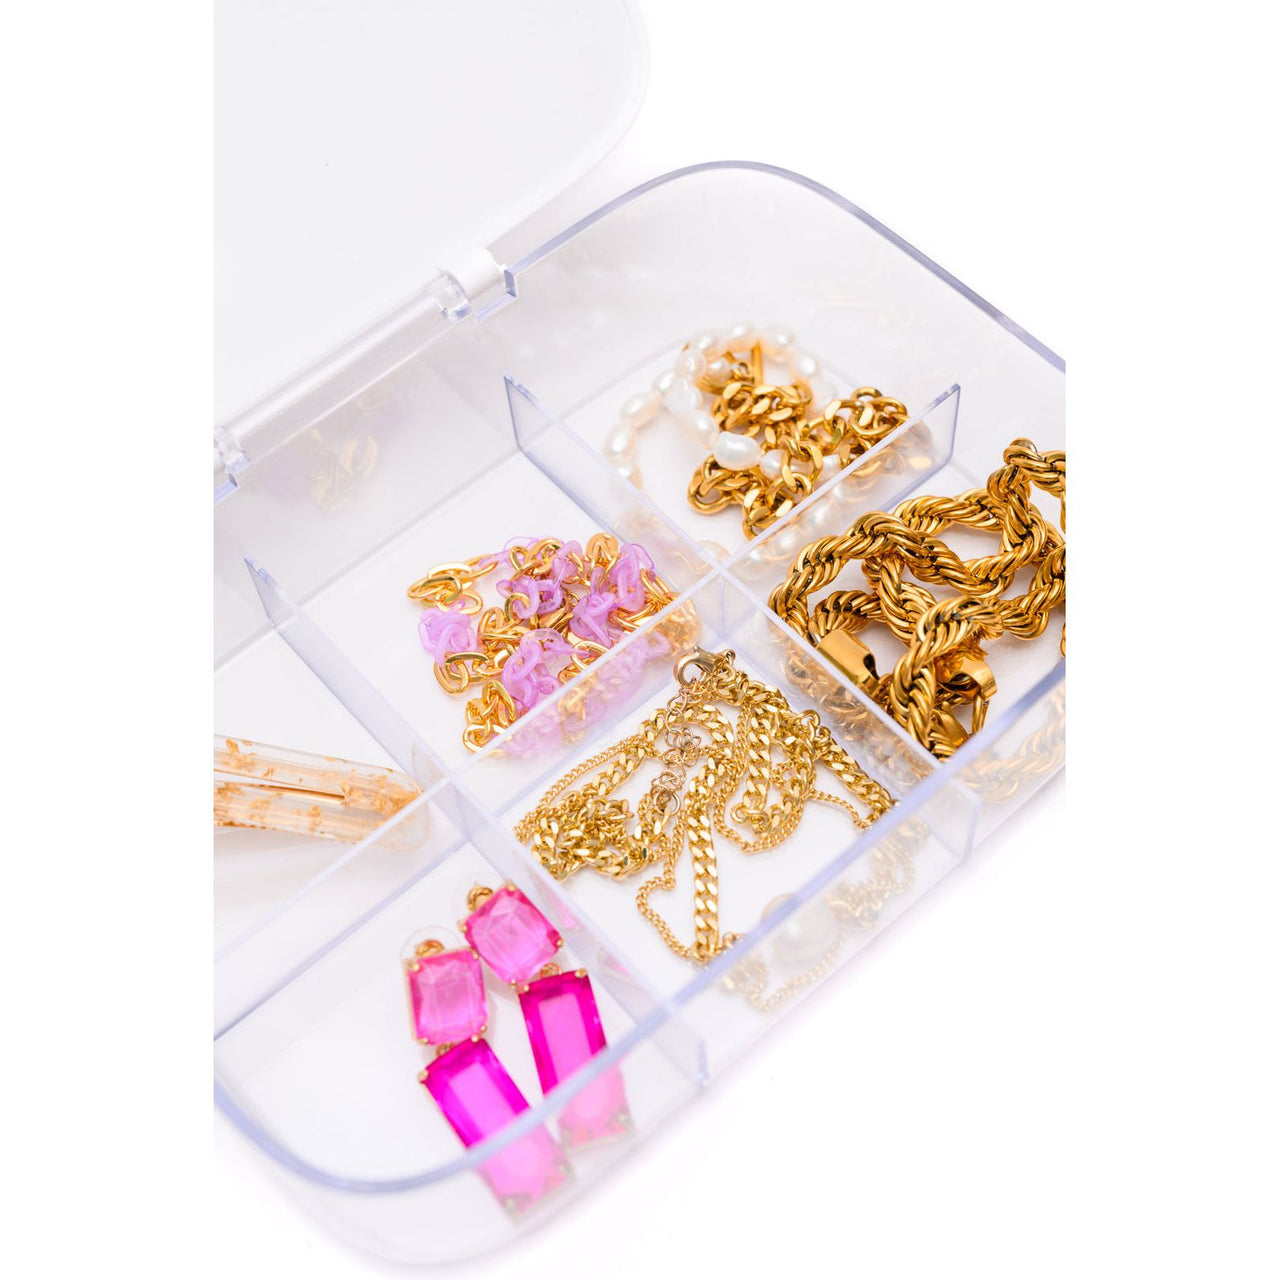 All Sorted Out Jewelry Storage Case Accessories Ave Shops   